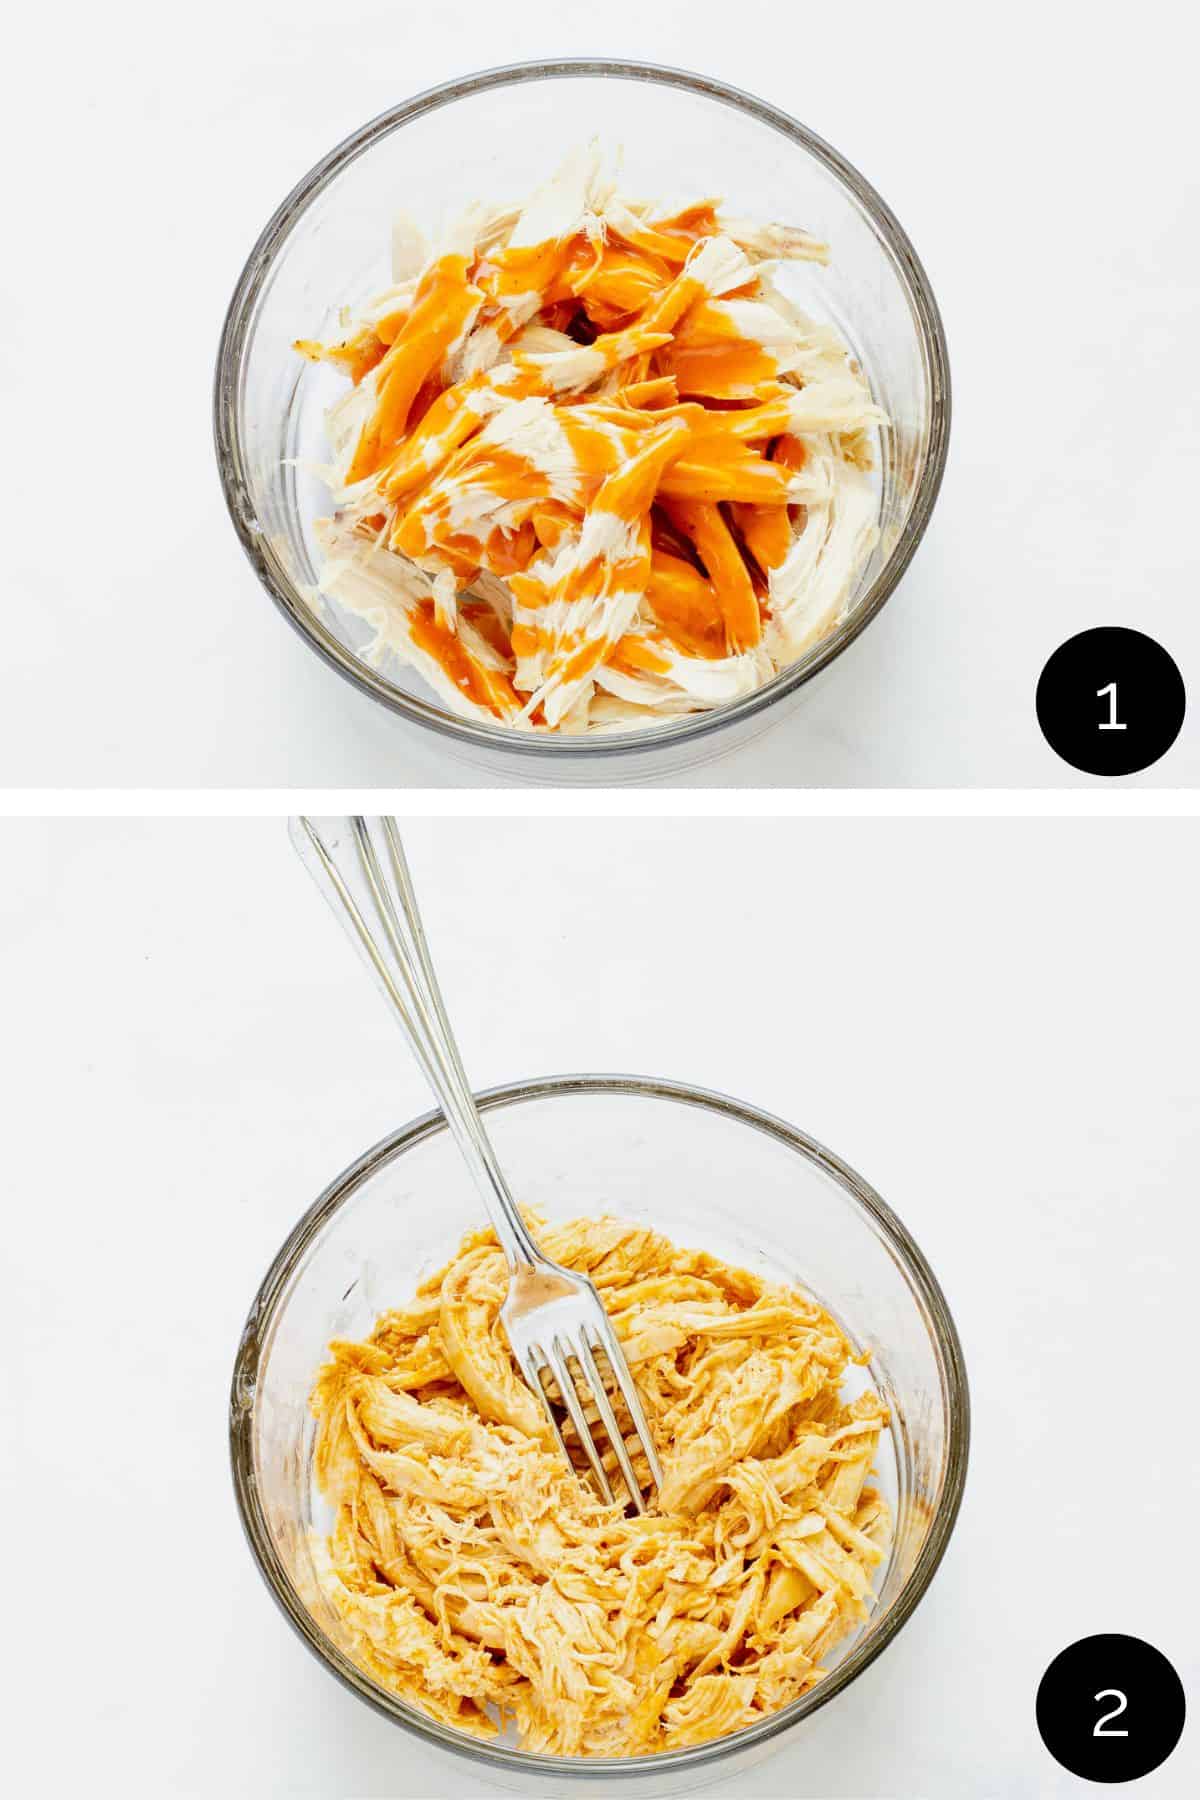 Steps 1 and 2 to make Buffalo Chicken Rice Bowls. Bowls with shredded chicken and sauce.